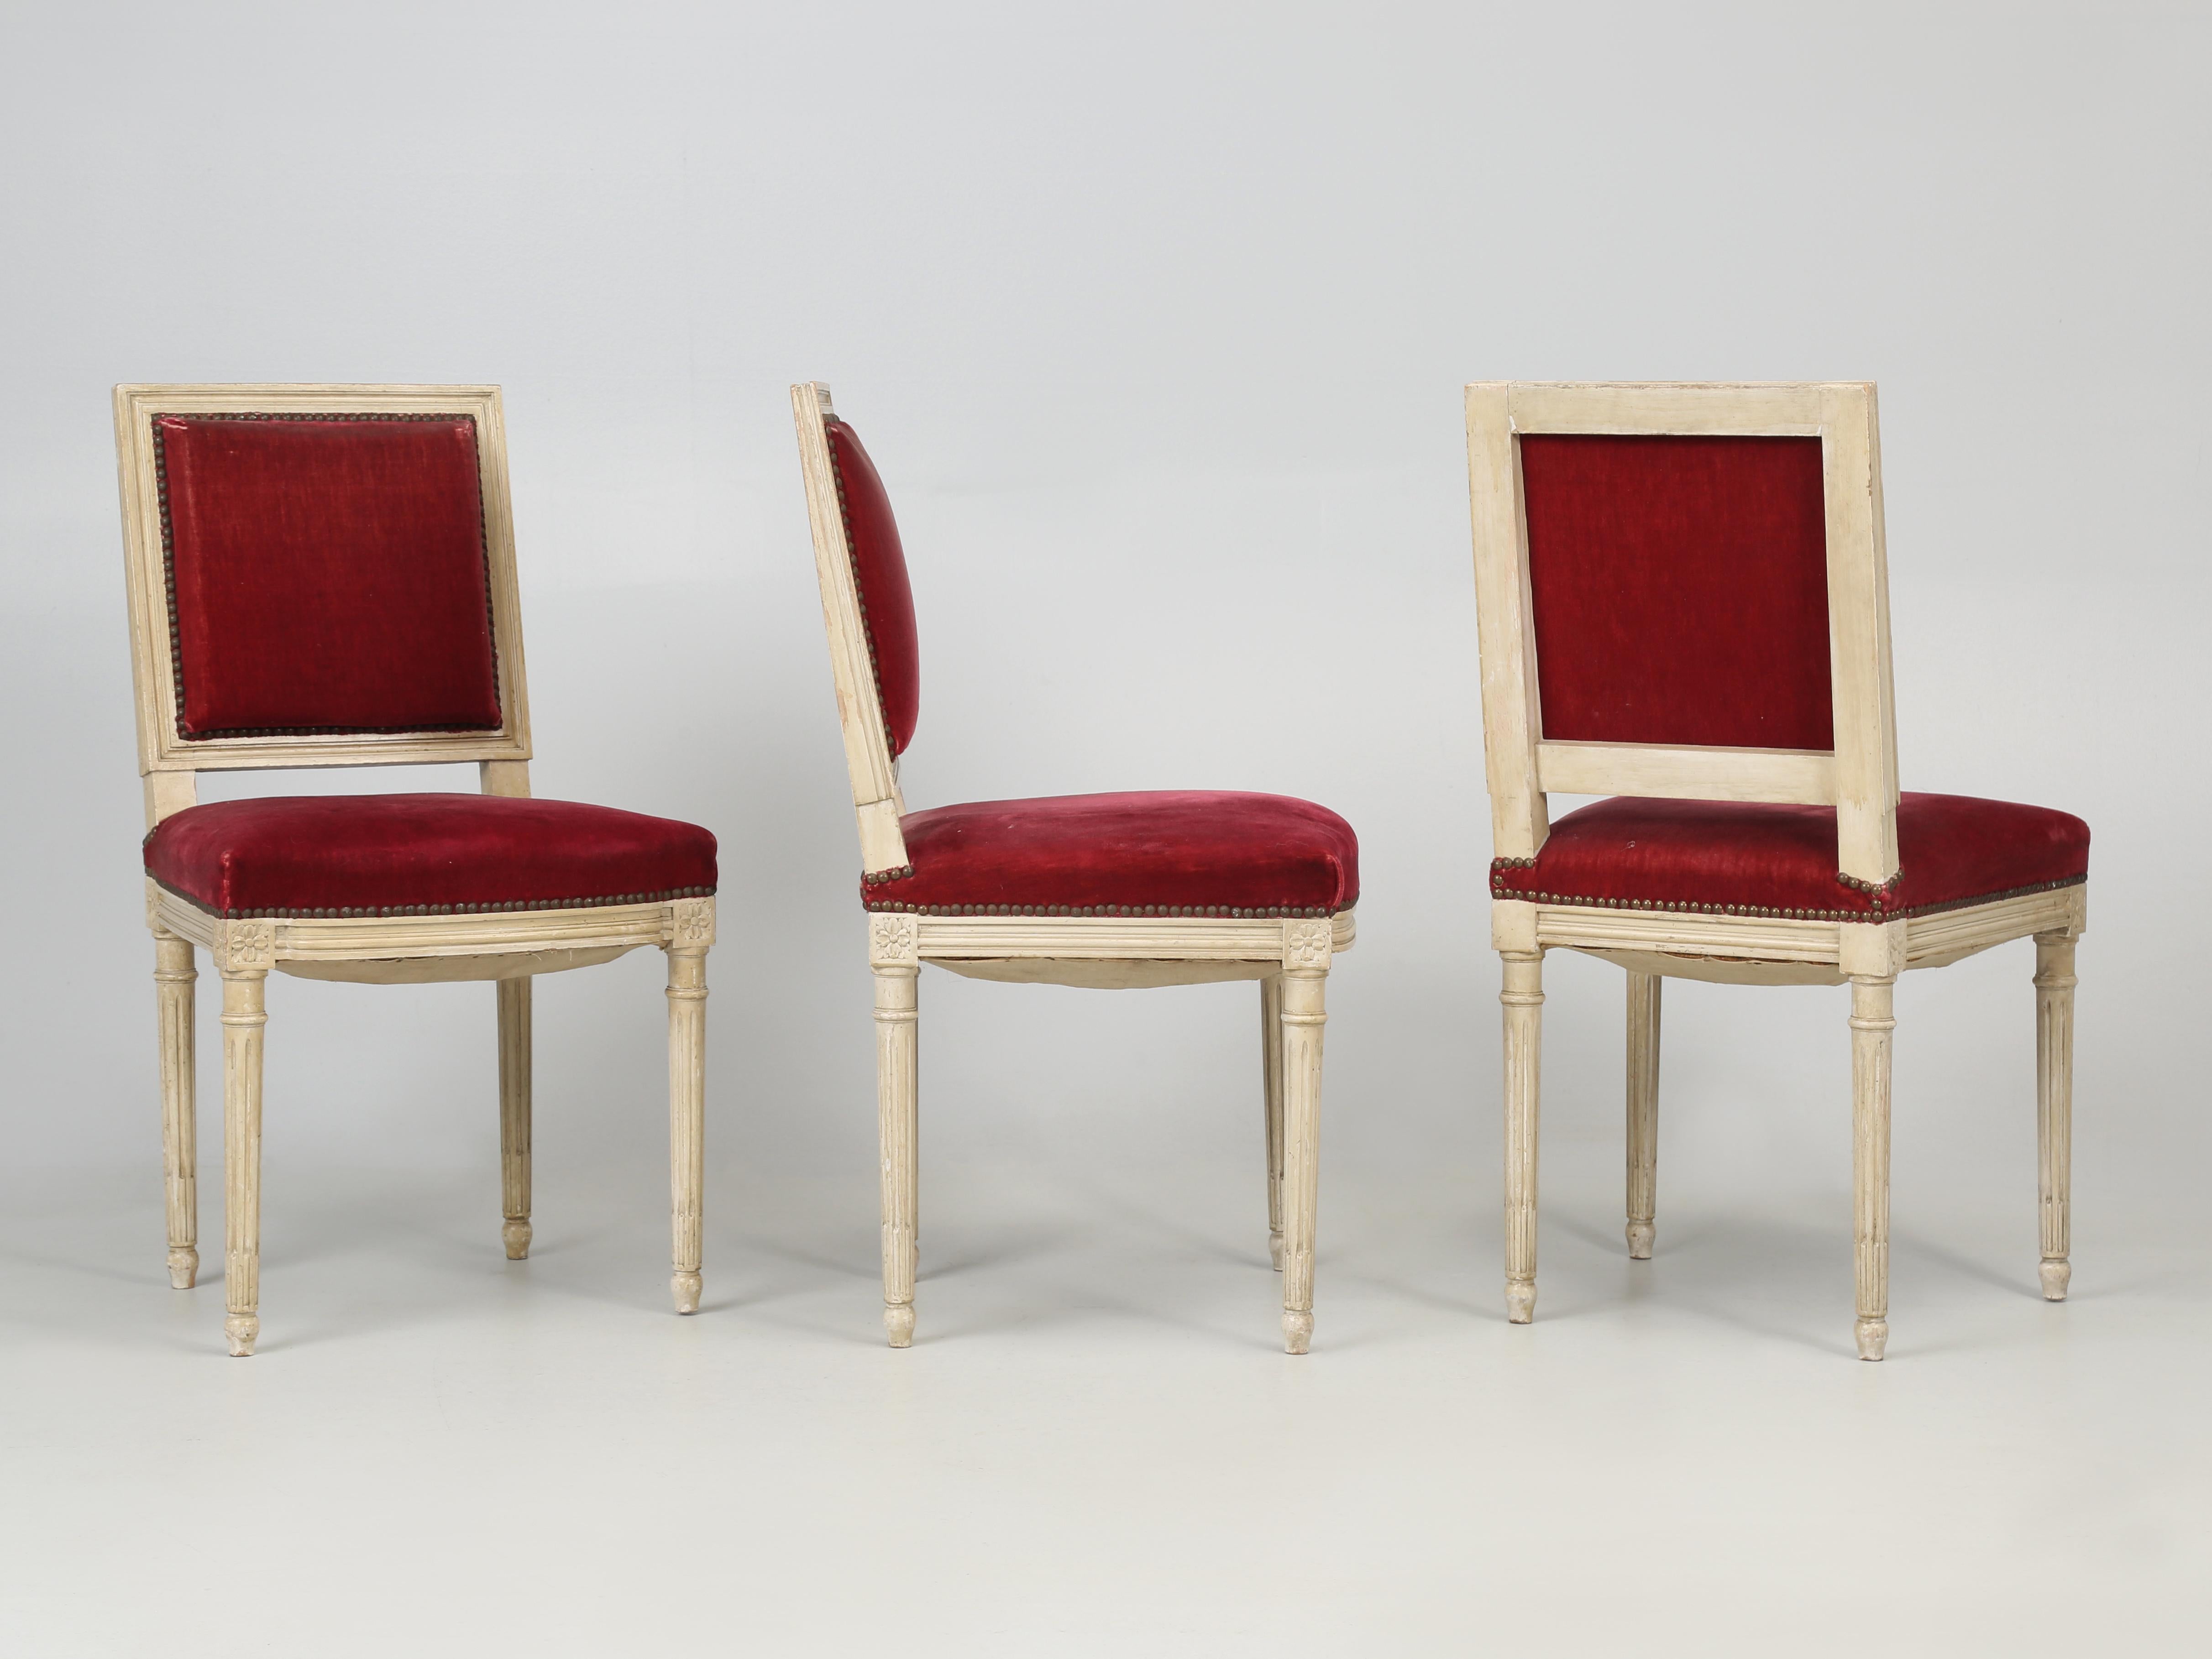 French Louis XVI style dining chairs, set of (6) surprisingly still in their original mohair fabric, although it definitely has seen better days. The paint as well on these Louis XVI dining chairs is also original, but appears to have some sort of